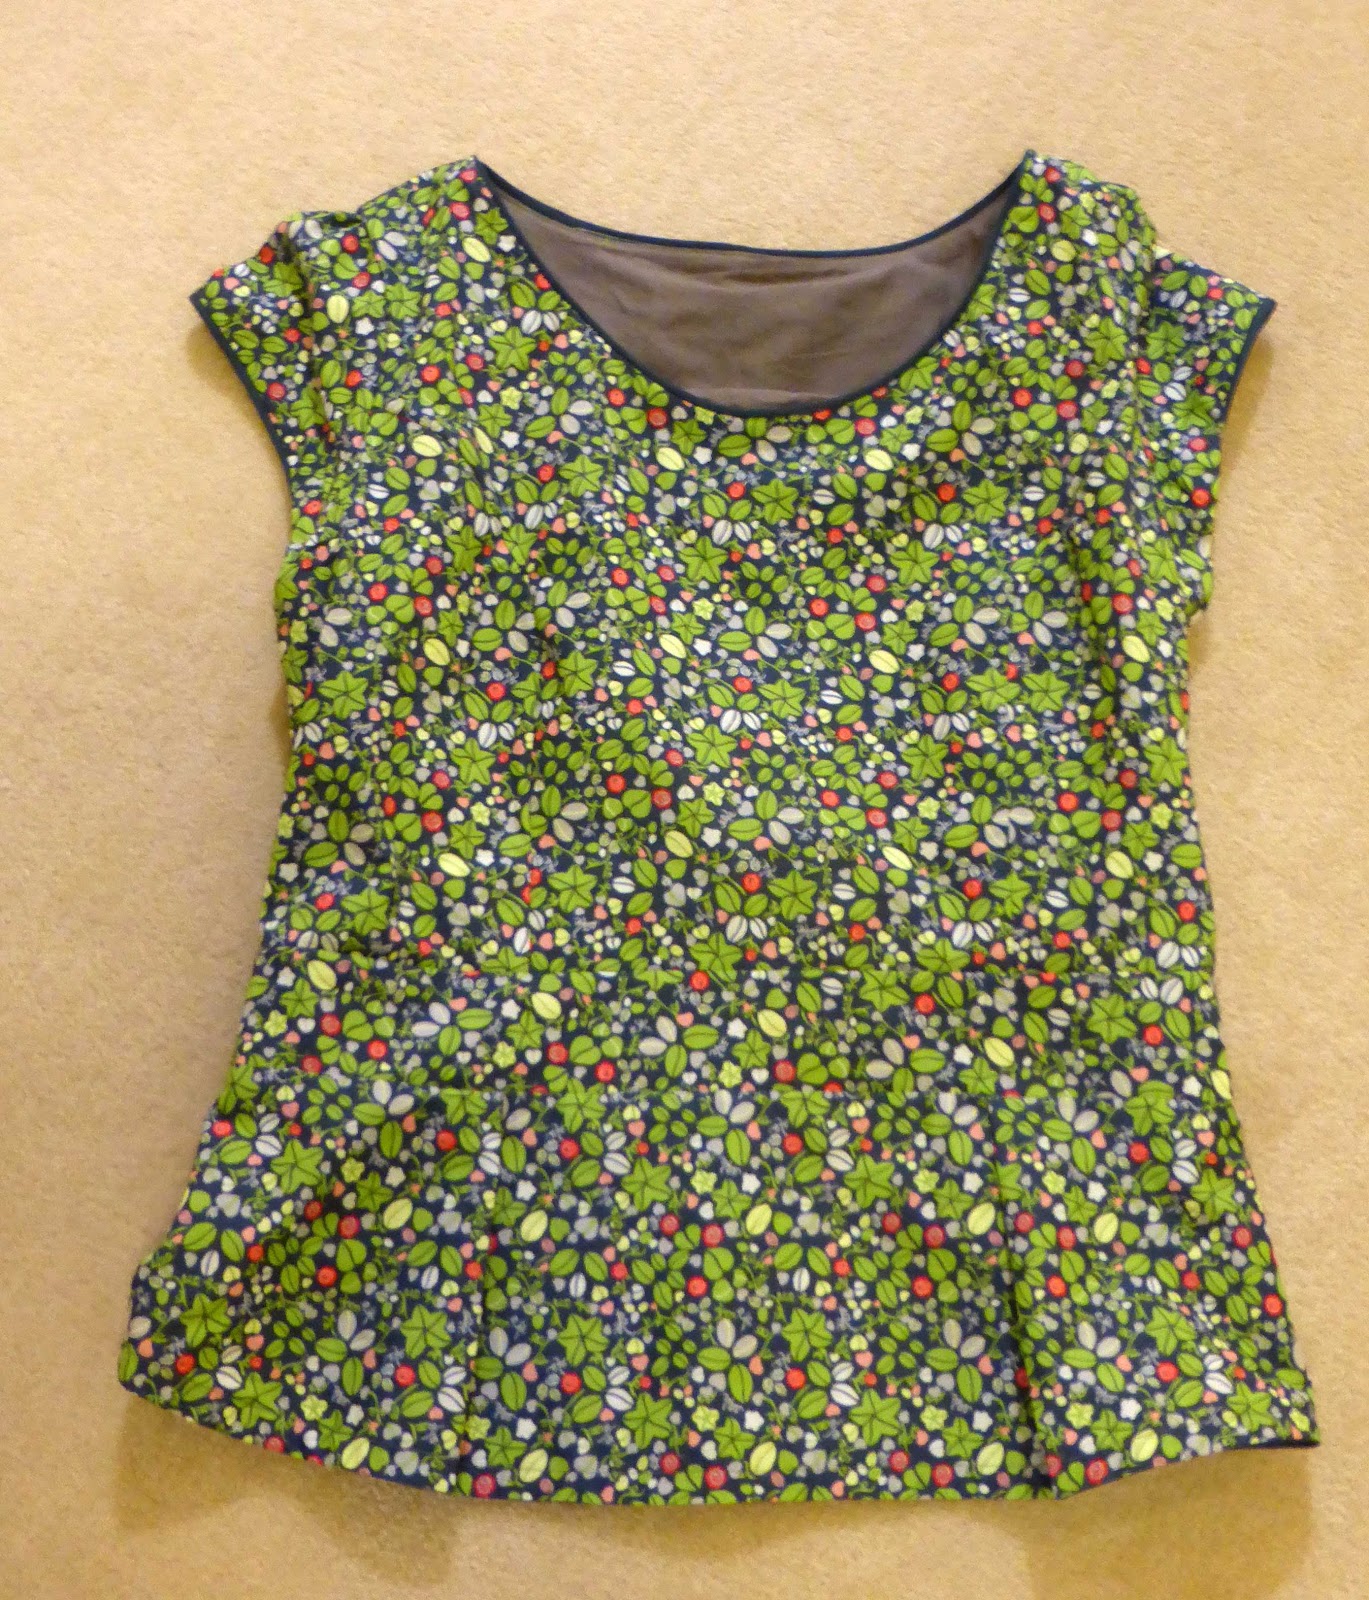 Liberty and Olive – velosews